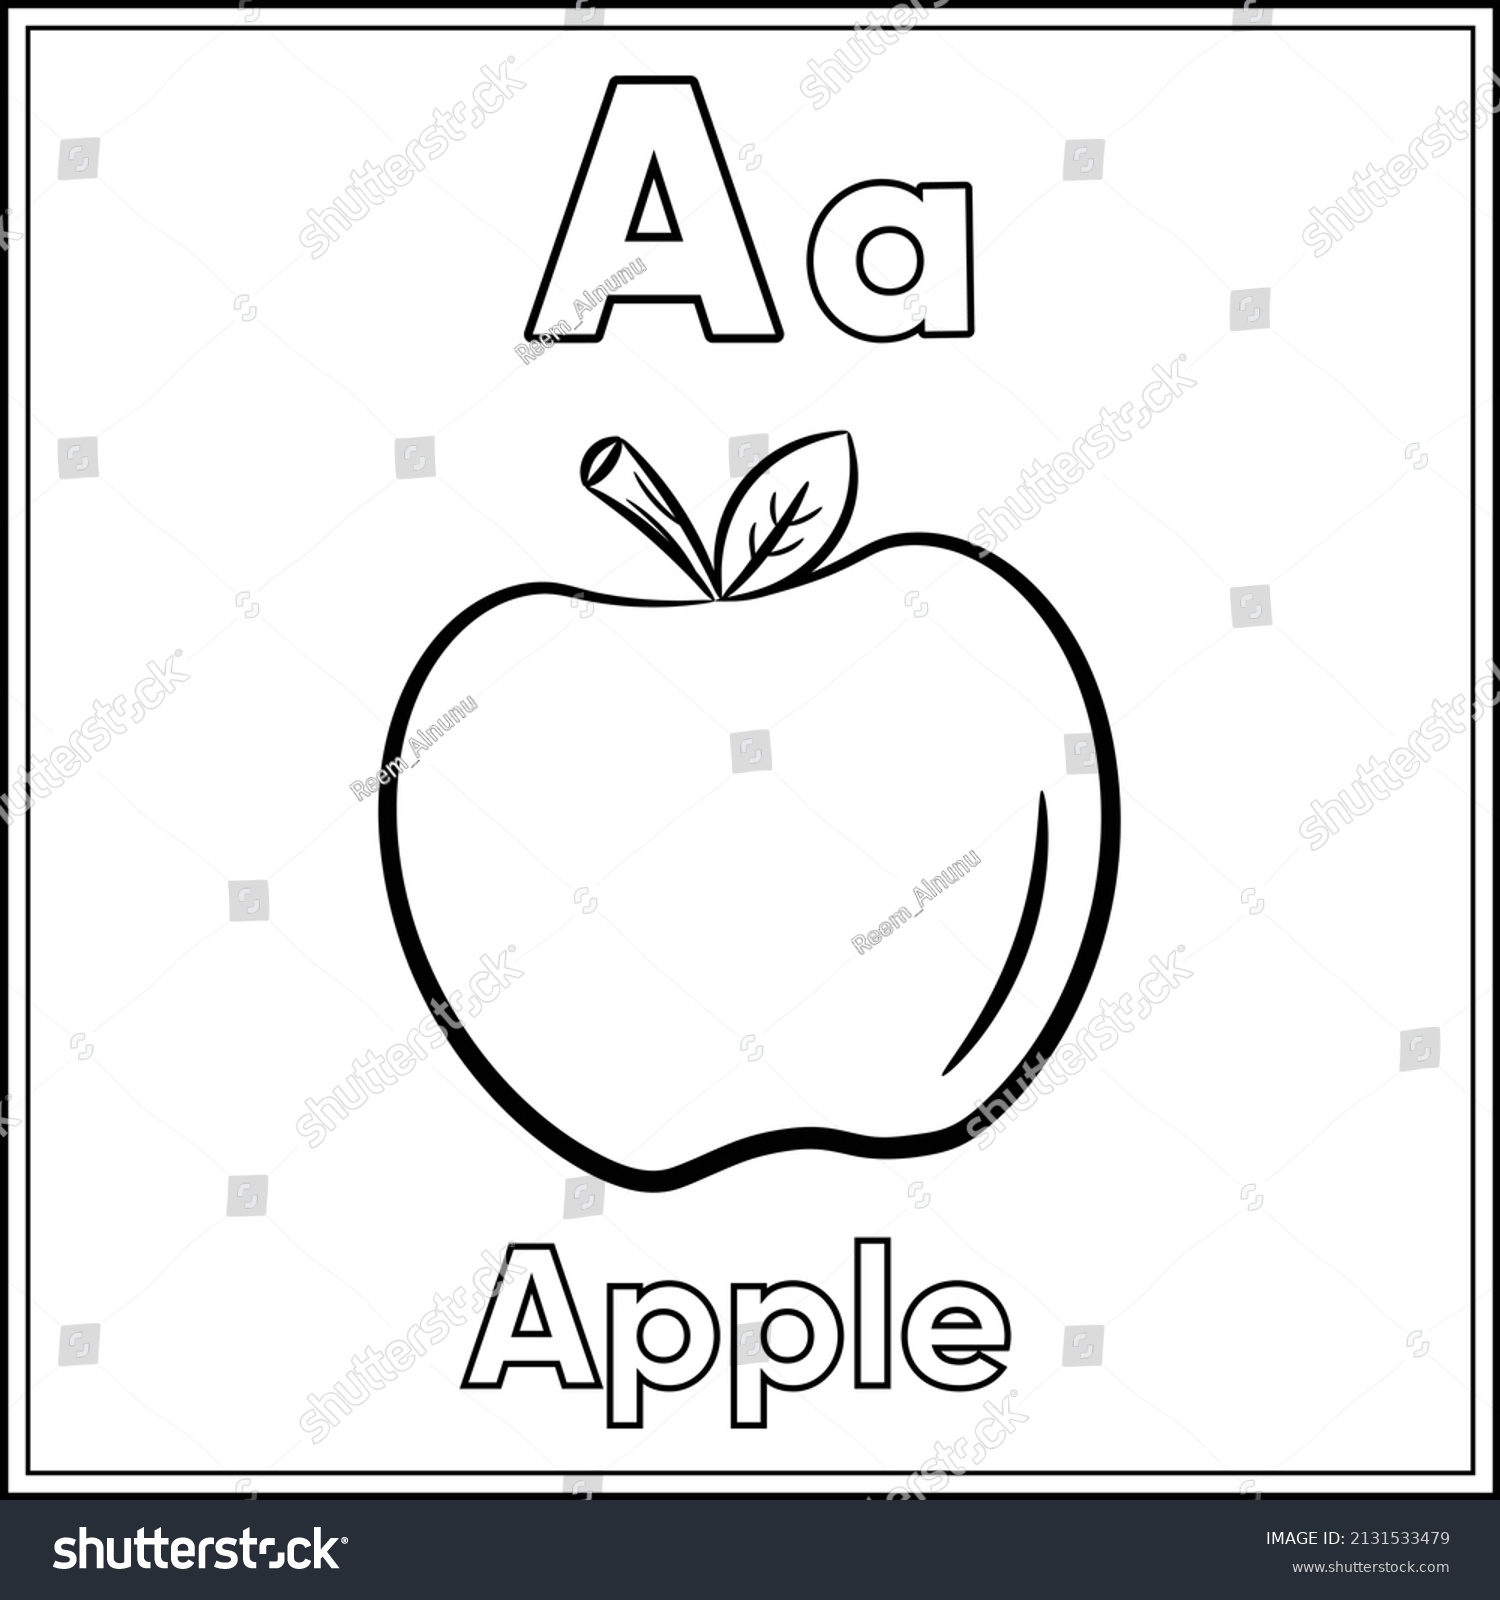 Alphabet Flashcard Letter Cute Apple Drawing Stock Vector (Royalty Free ...